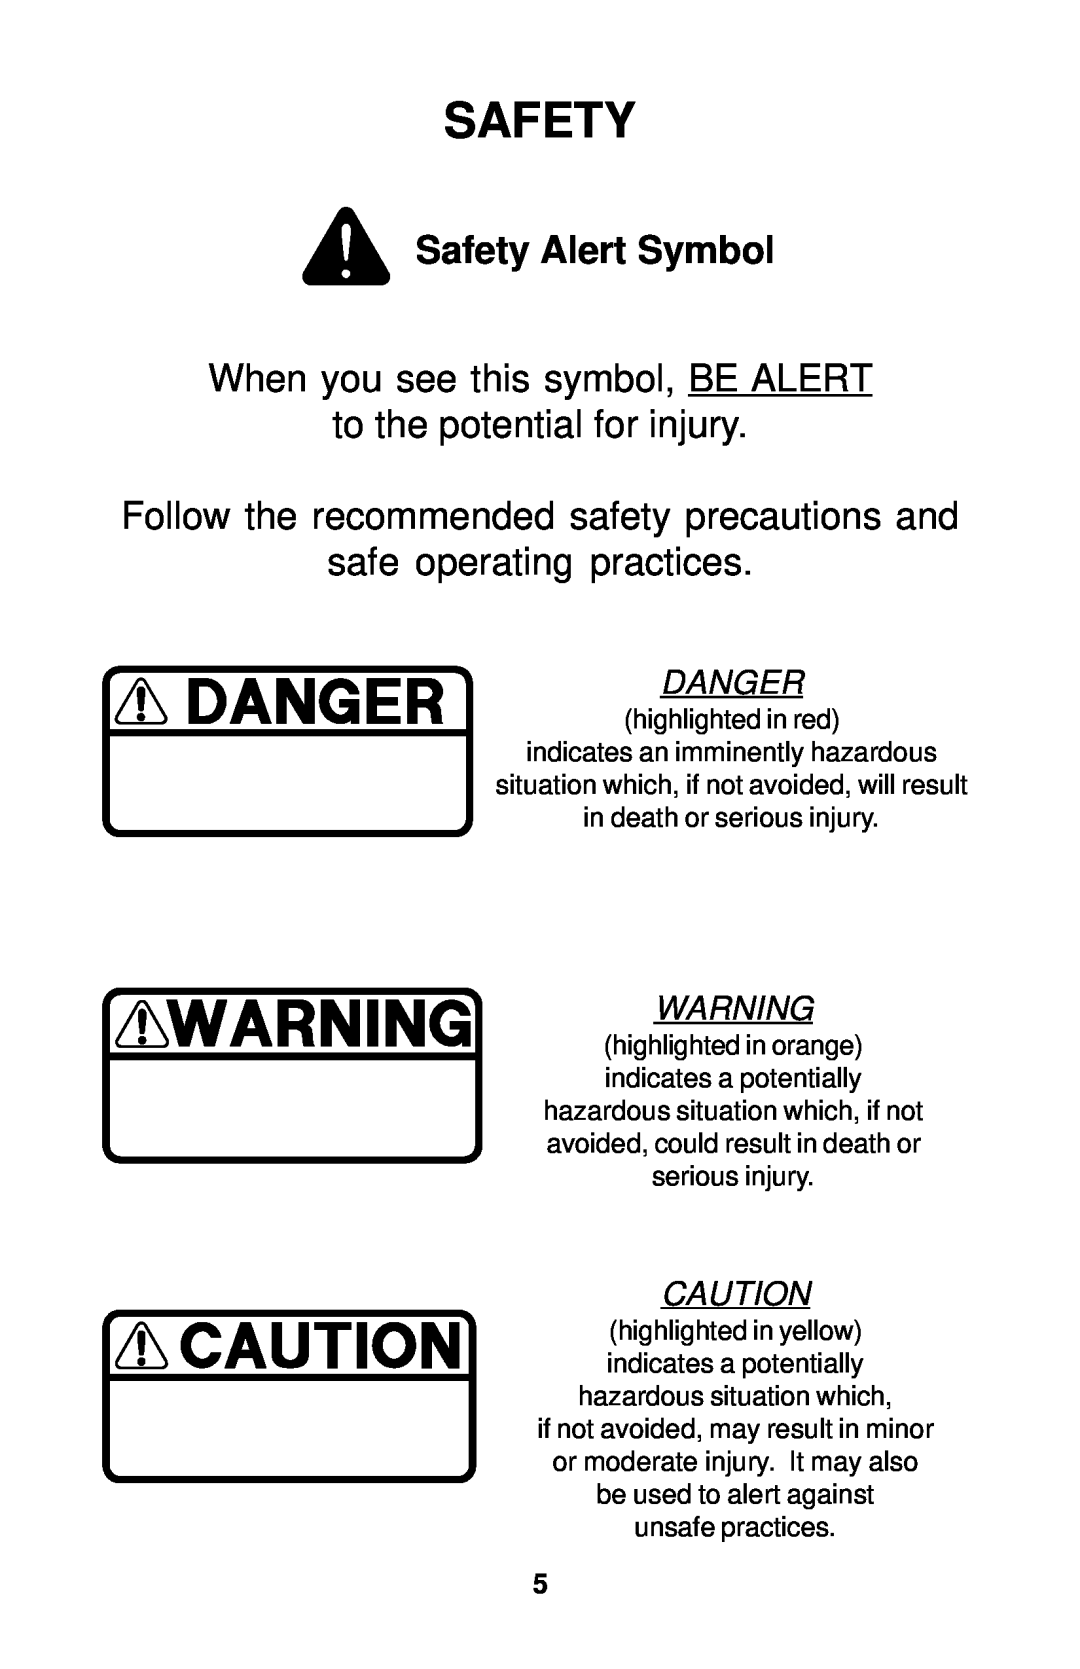 Dixon 18134-1004 manual Safety Alert Symbol, When you see this symbol, BE ALERT, to the potential for injury, Danger 